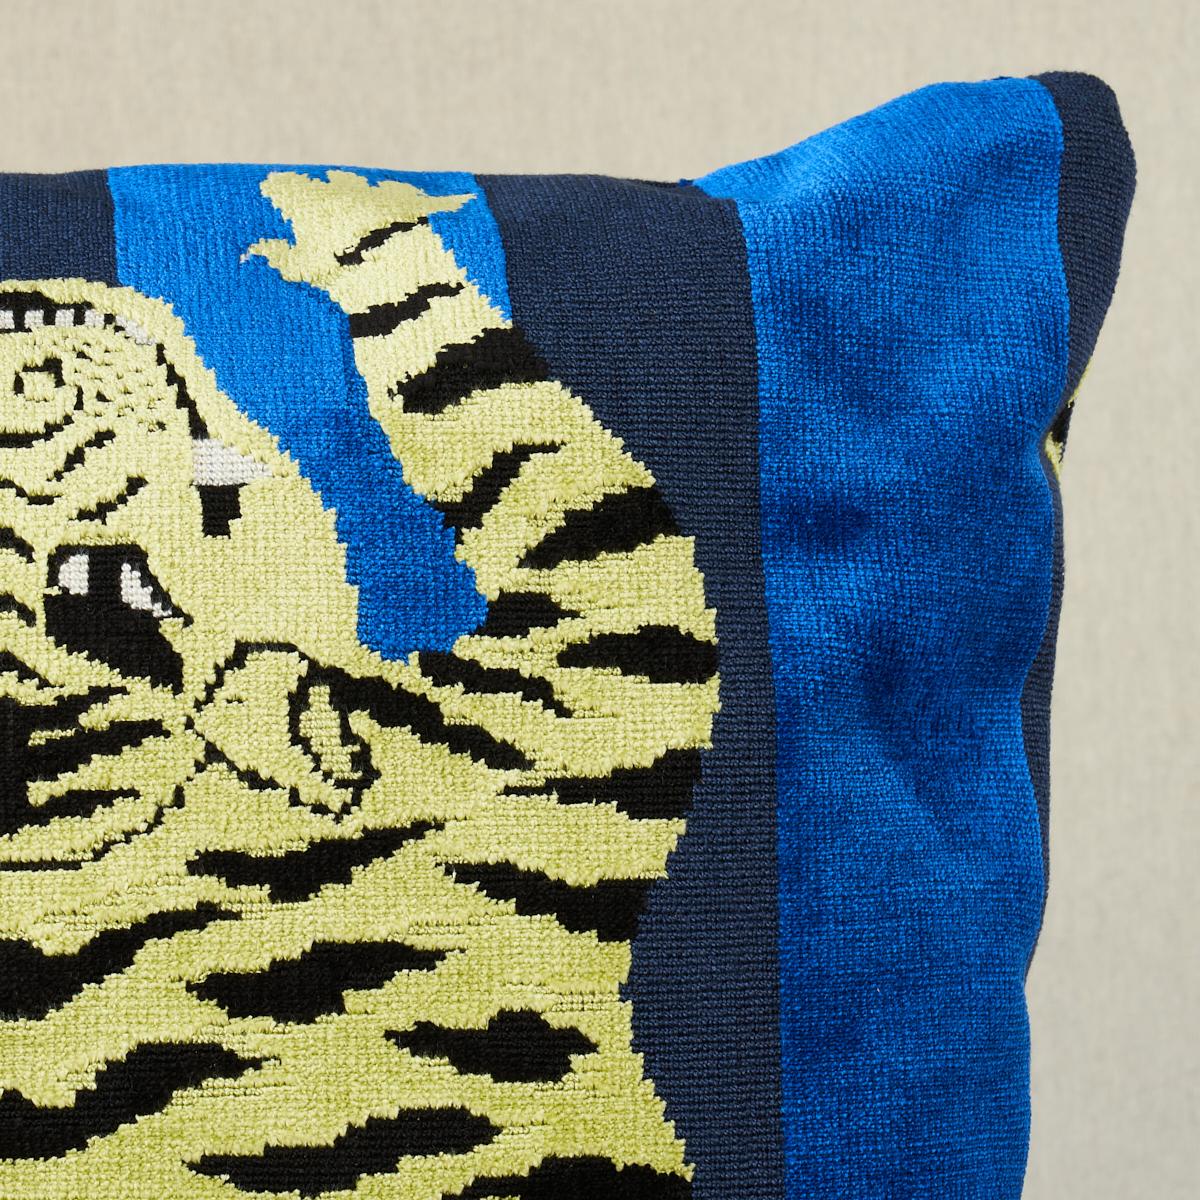 This pillow features Jokhang Tiger Velvet by Johnson Hartig/Libertine for Schumacher with a knife edge finish. Designed by Johnson Hartig, the Tibetan tiger motif is recast as a multi-dimensional stripe on a lush velvet that can easily work in a